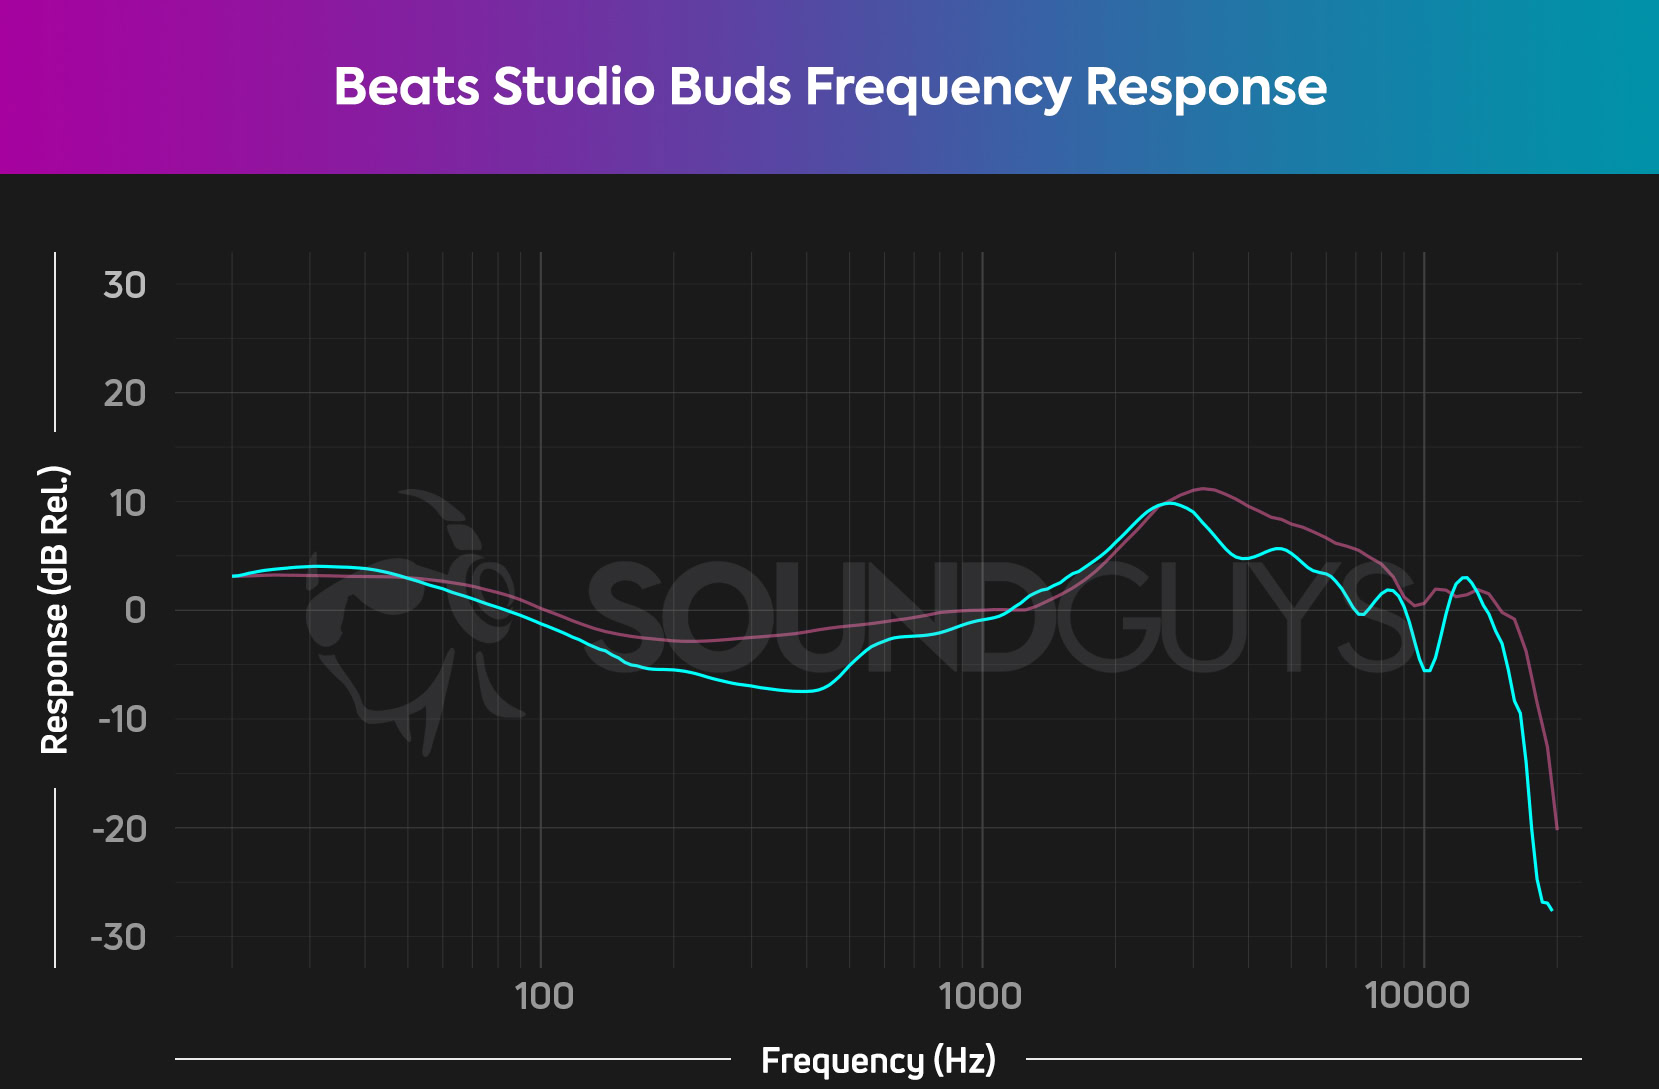 A frequency response chart for the Beats Studio Buds noise cancelling true wireless earphones, which depicts amplified bass and treble notes.